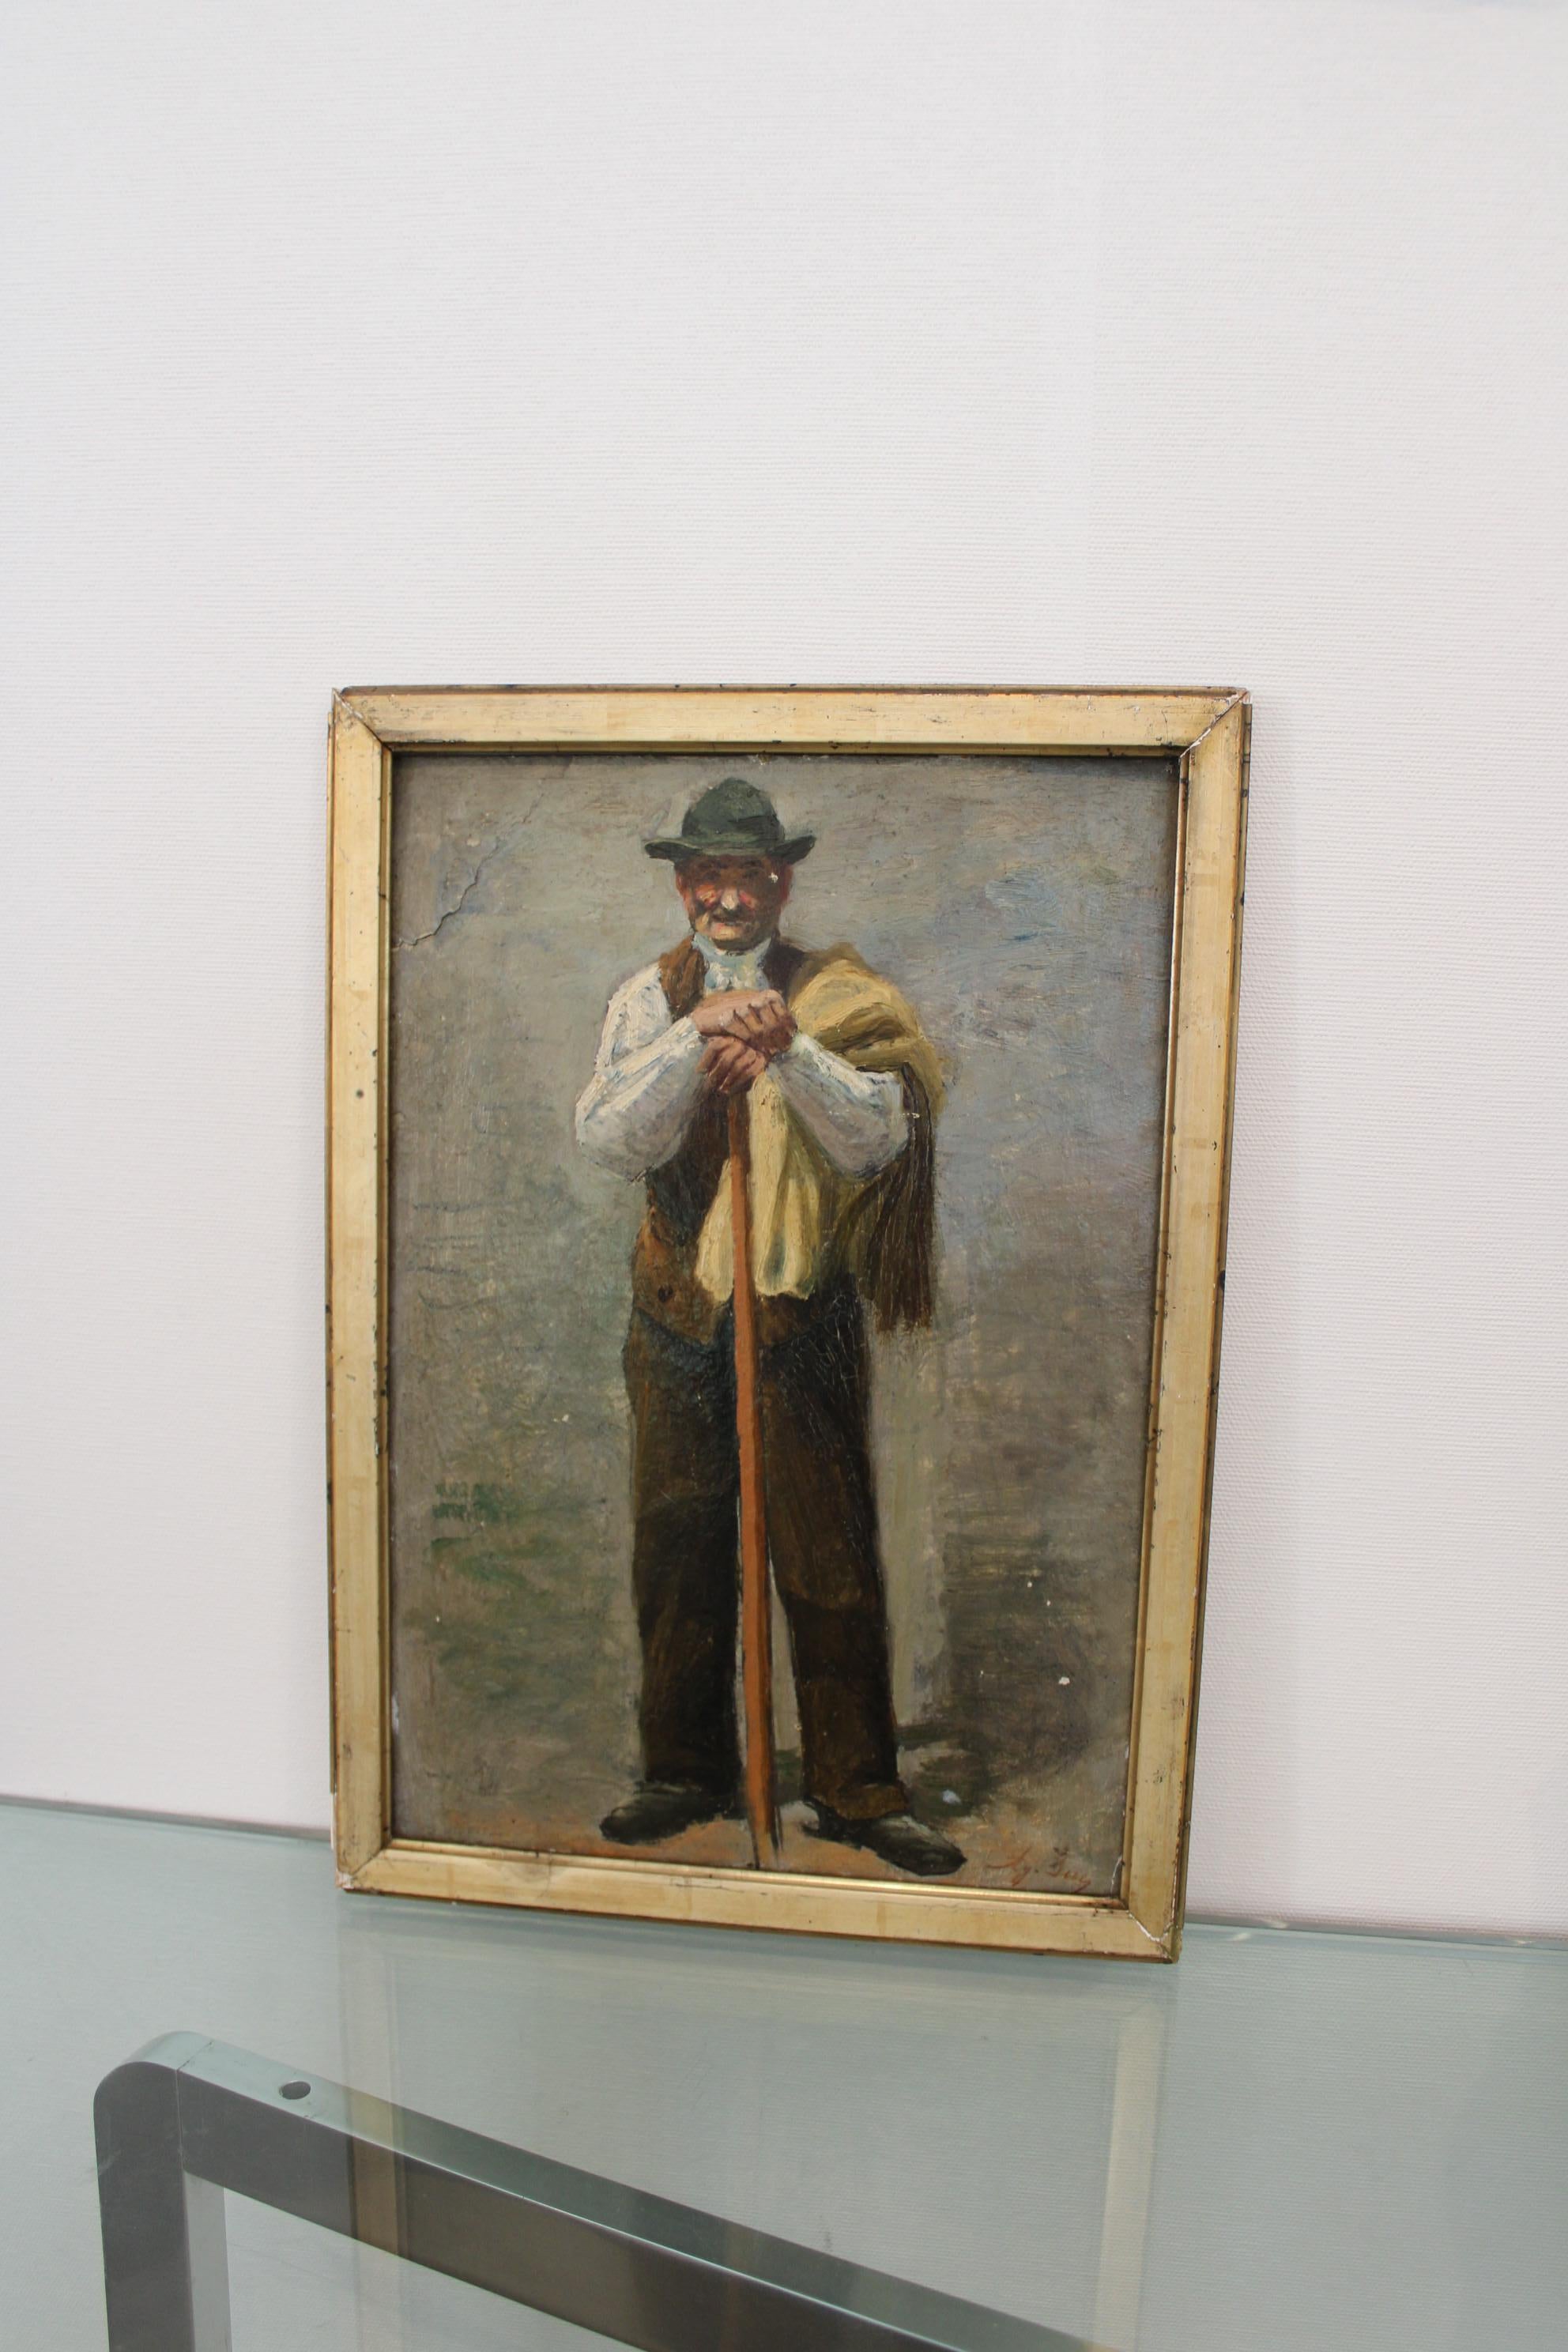 Portrait of a Provençal man by August Suc
Oil on cardboard
Signed on the corner Ag.Suc 
France, 19th-20th century

Damaged paint in some places (see photos details).